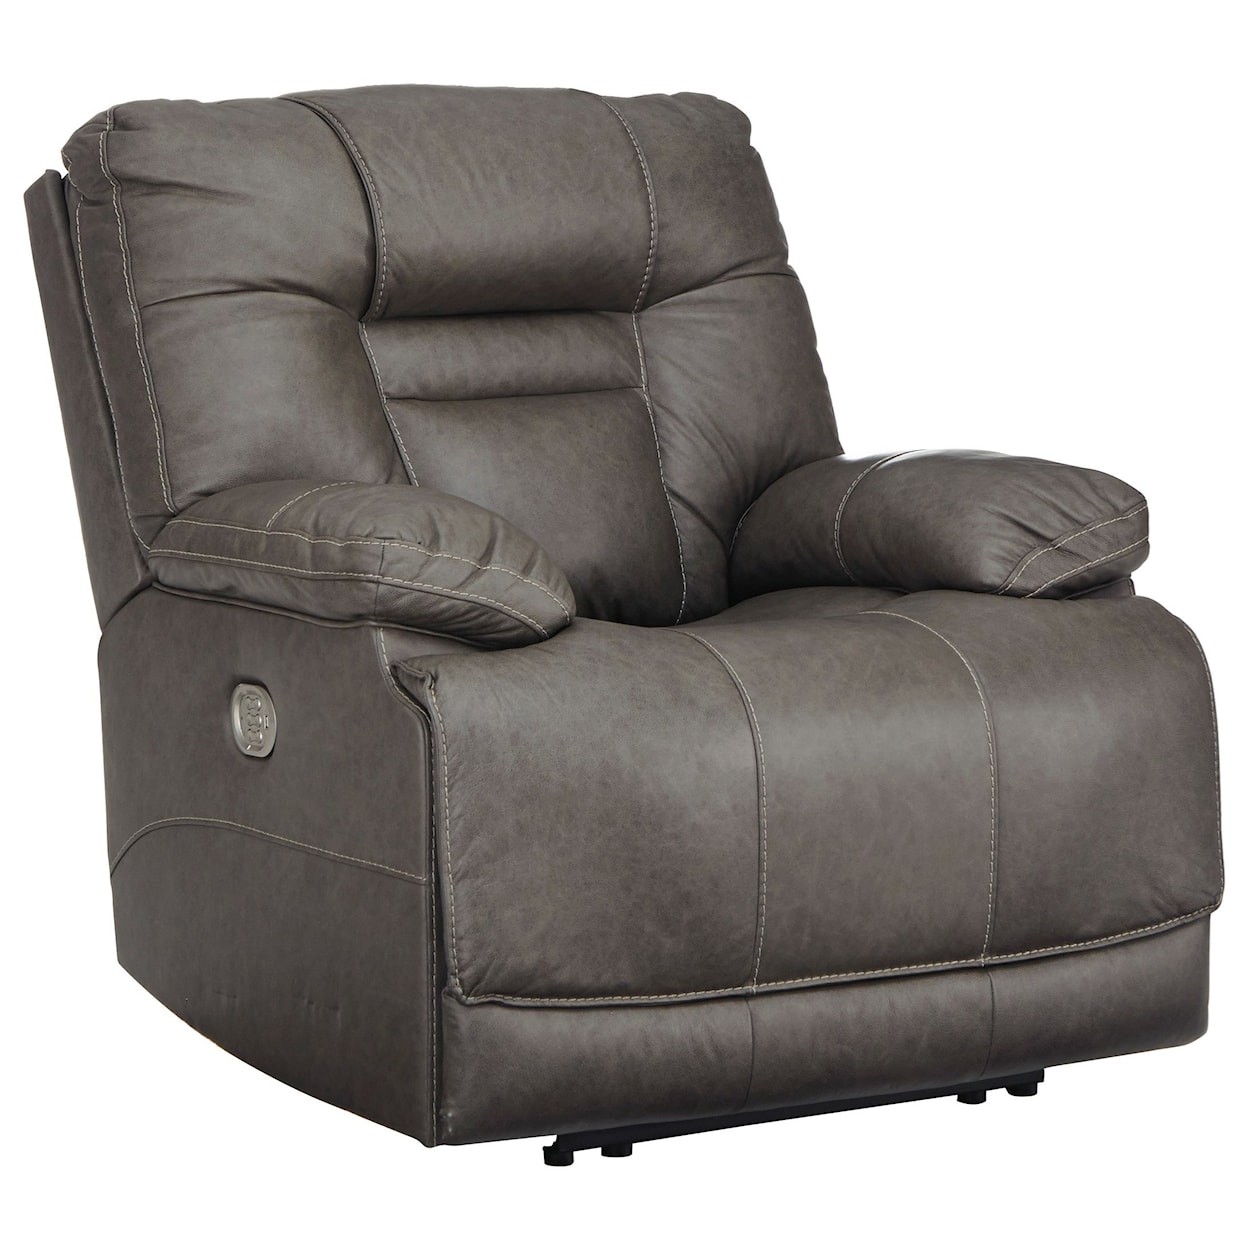 Signature Design by Ashley Furniture Wurstrow Power Recliner